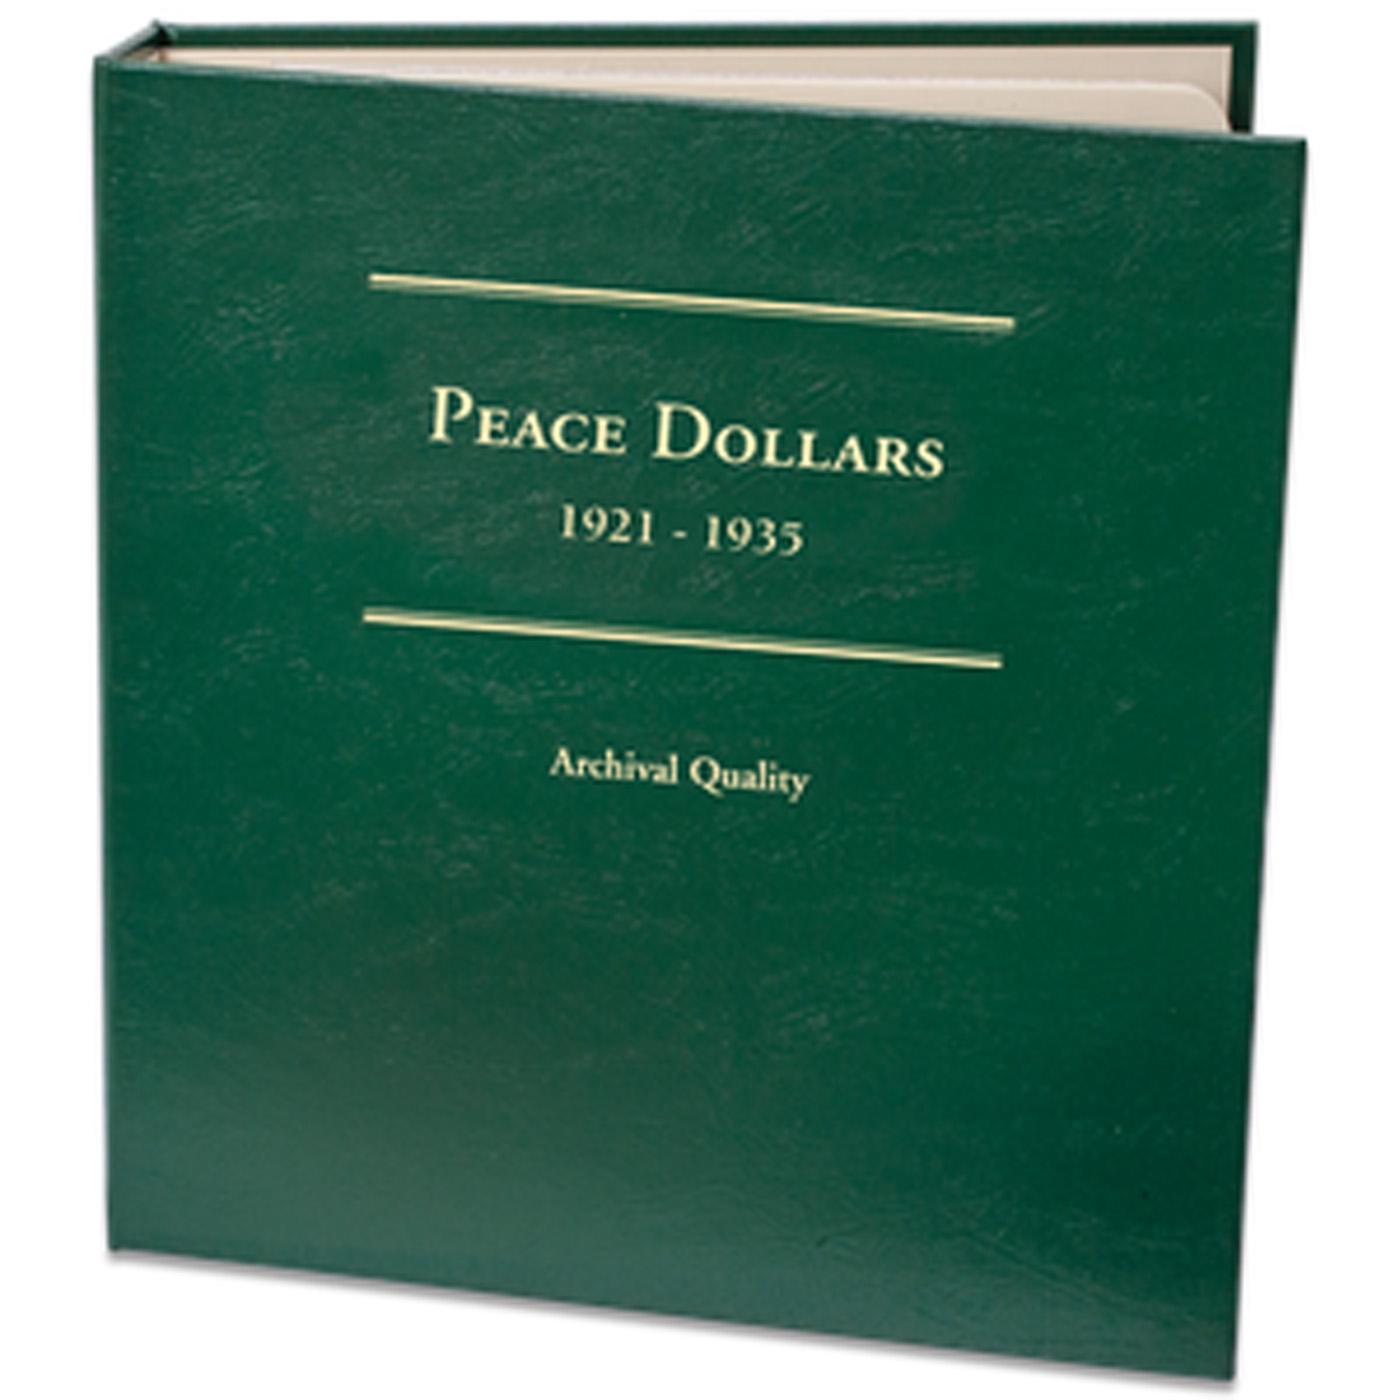 Littleton Peace Dollars 1921-1935 Collectors Book - No Coins